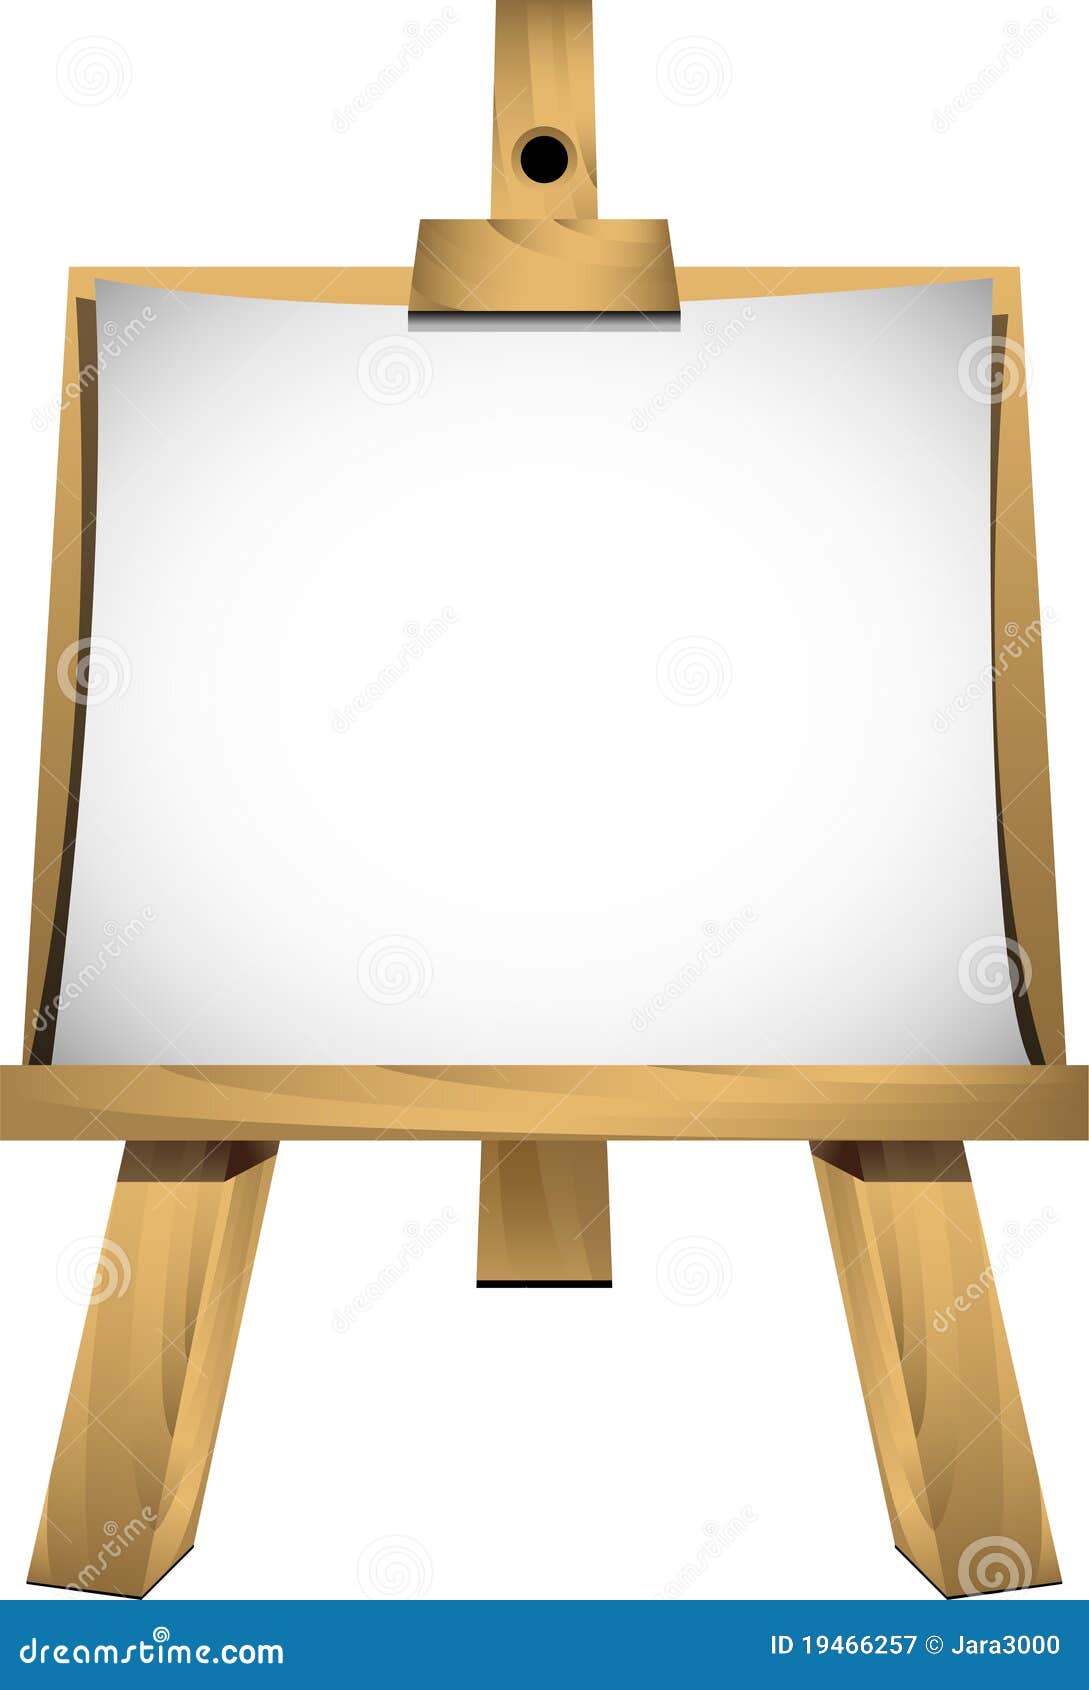 Easel With A Blank Sheet Of White Paper Royalty Free Stock 